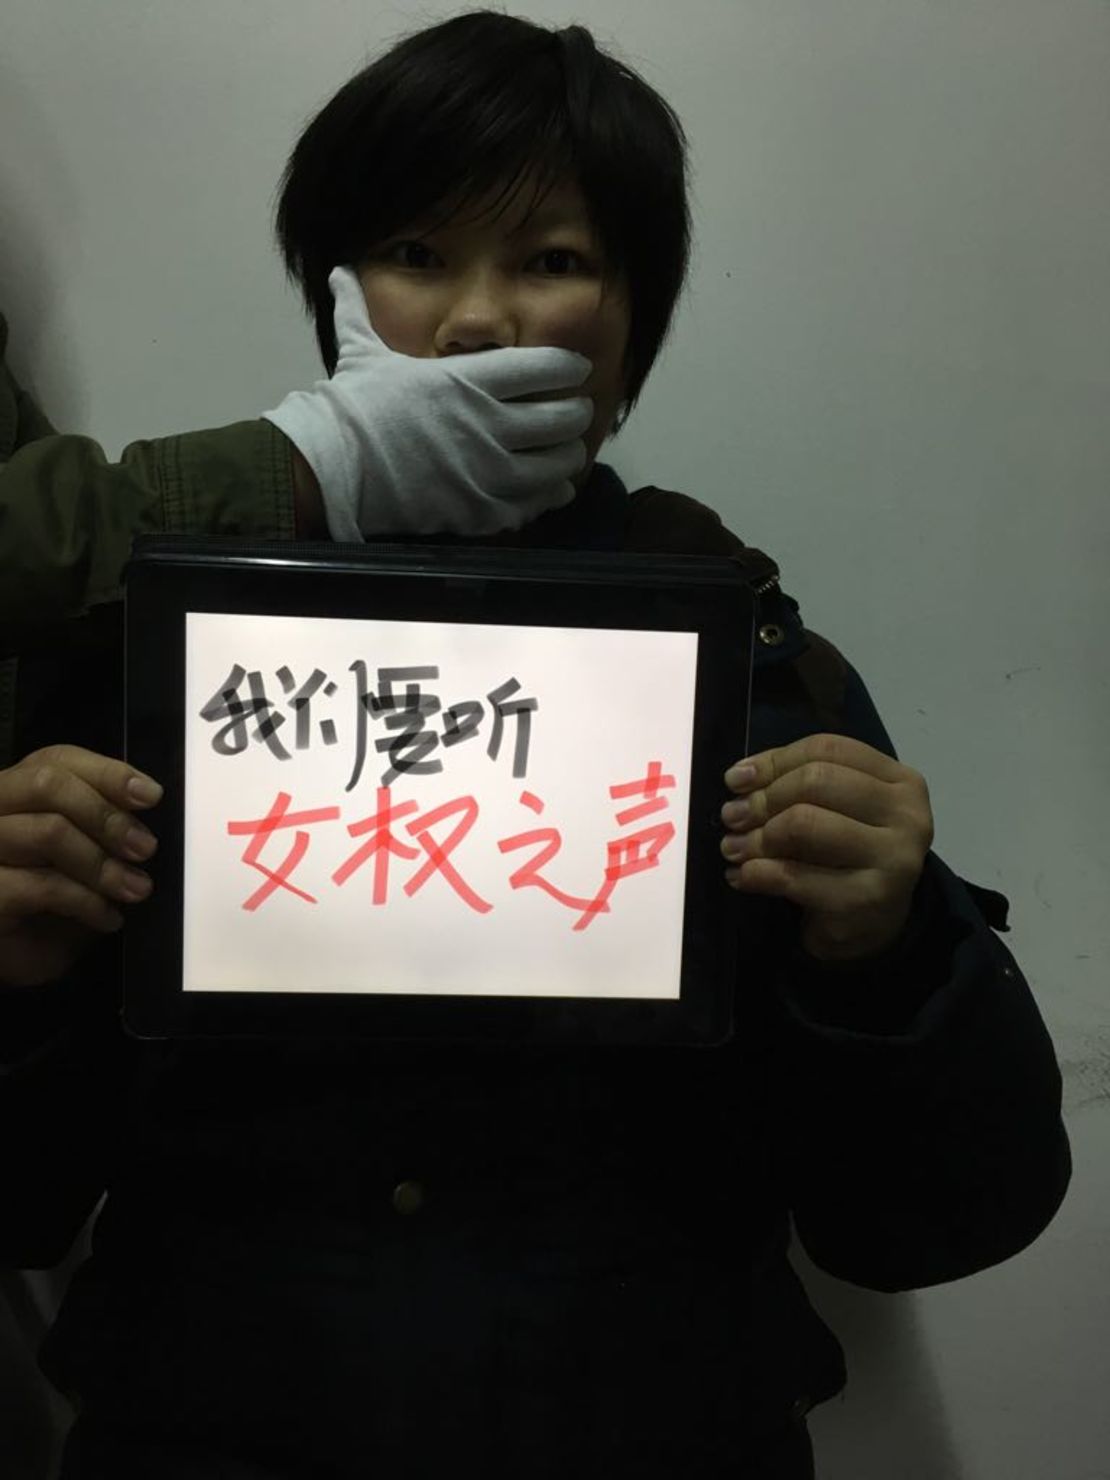 "We want to hear women's voices." Chinese feminists say they have been gagged online.